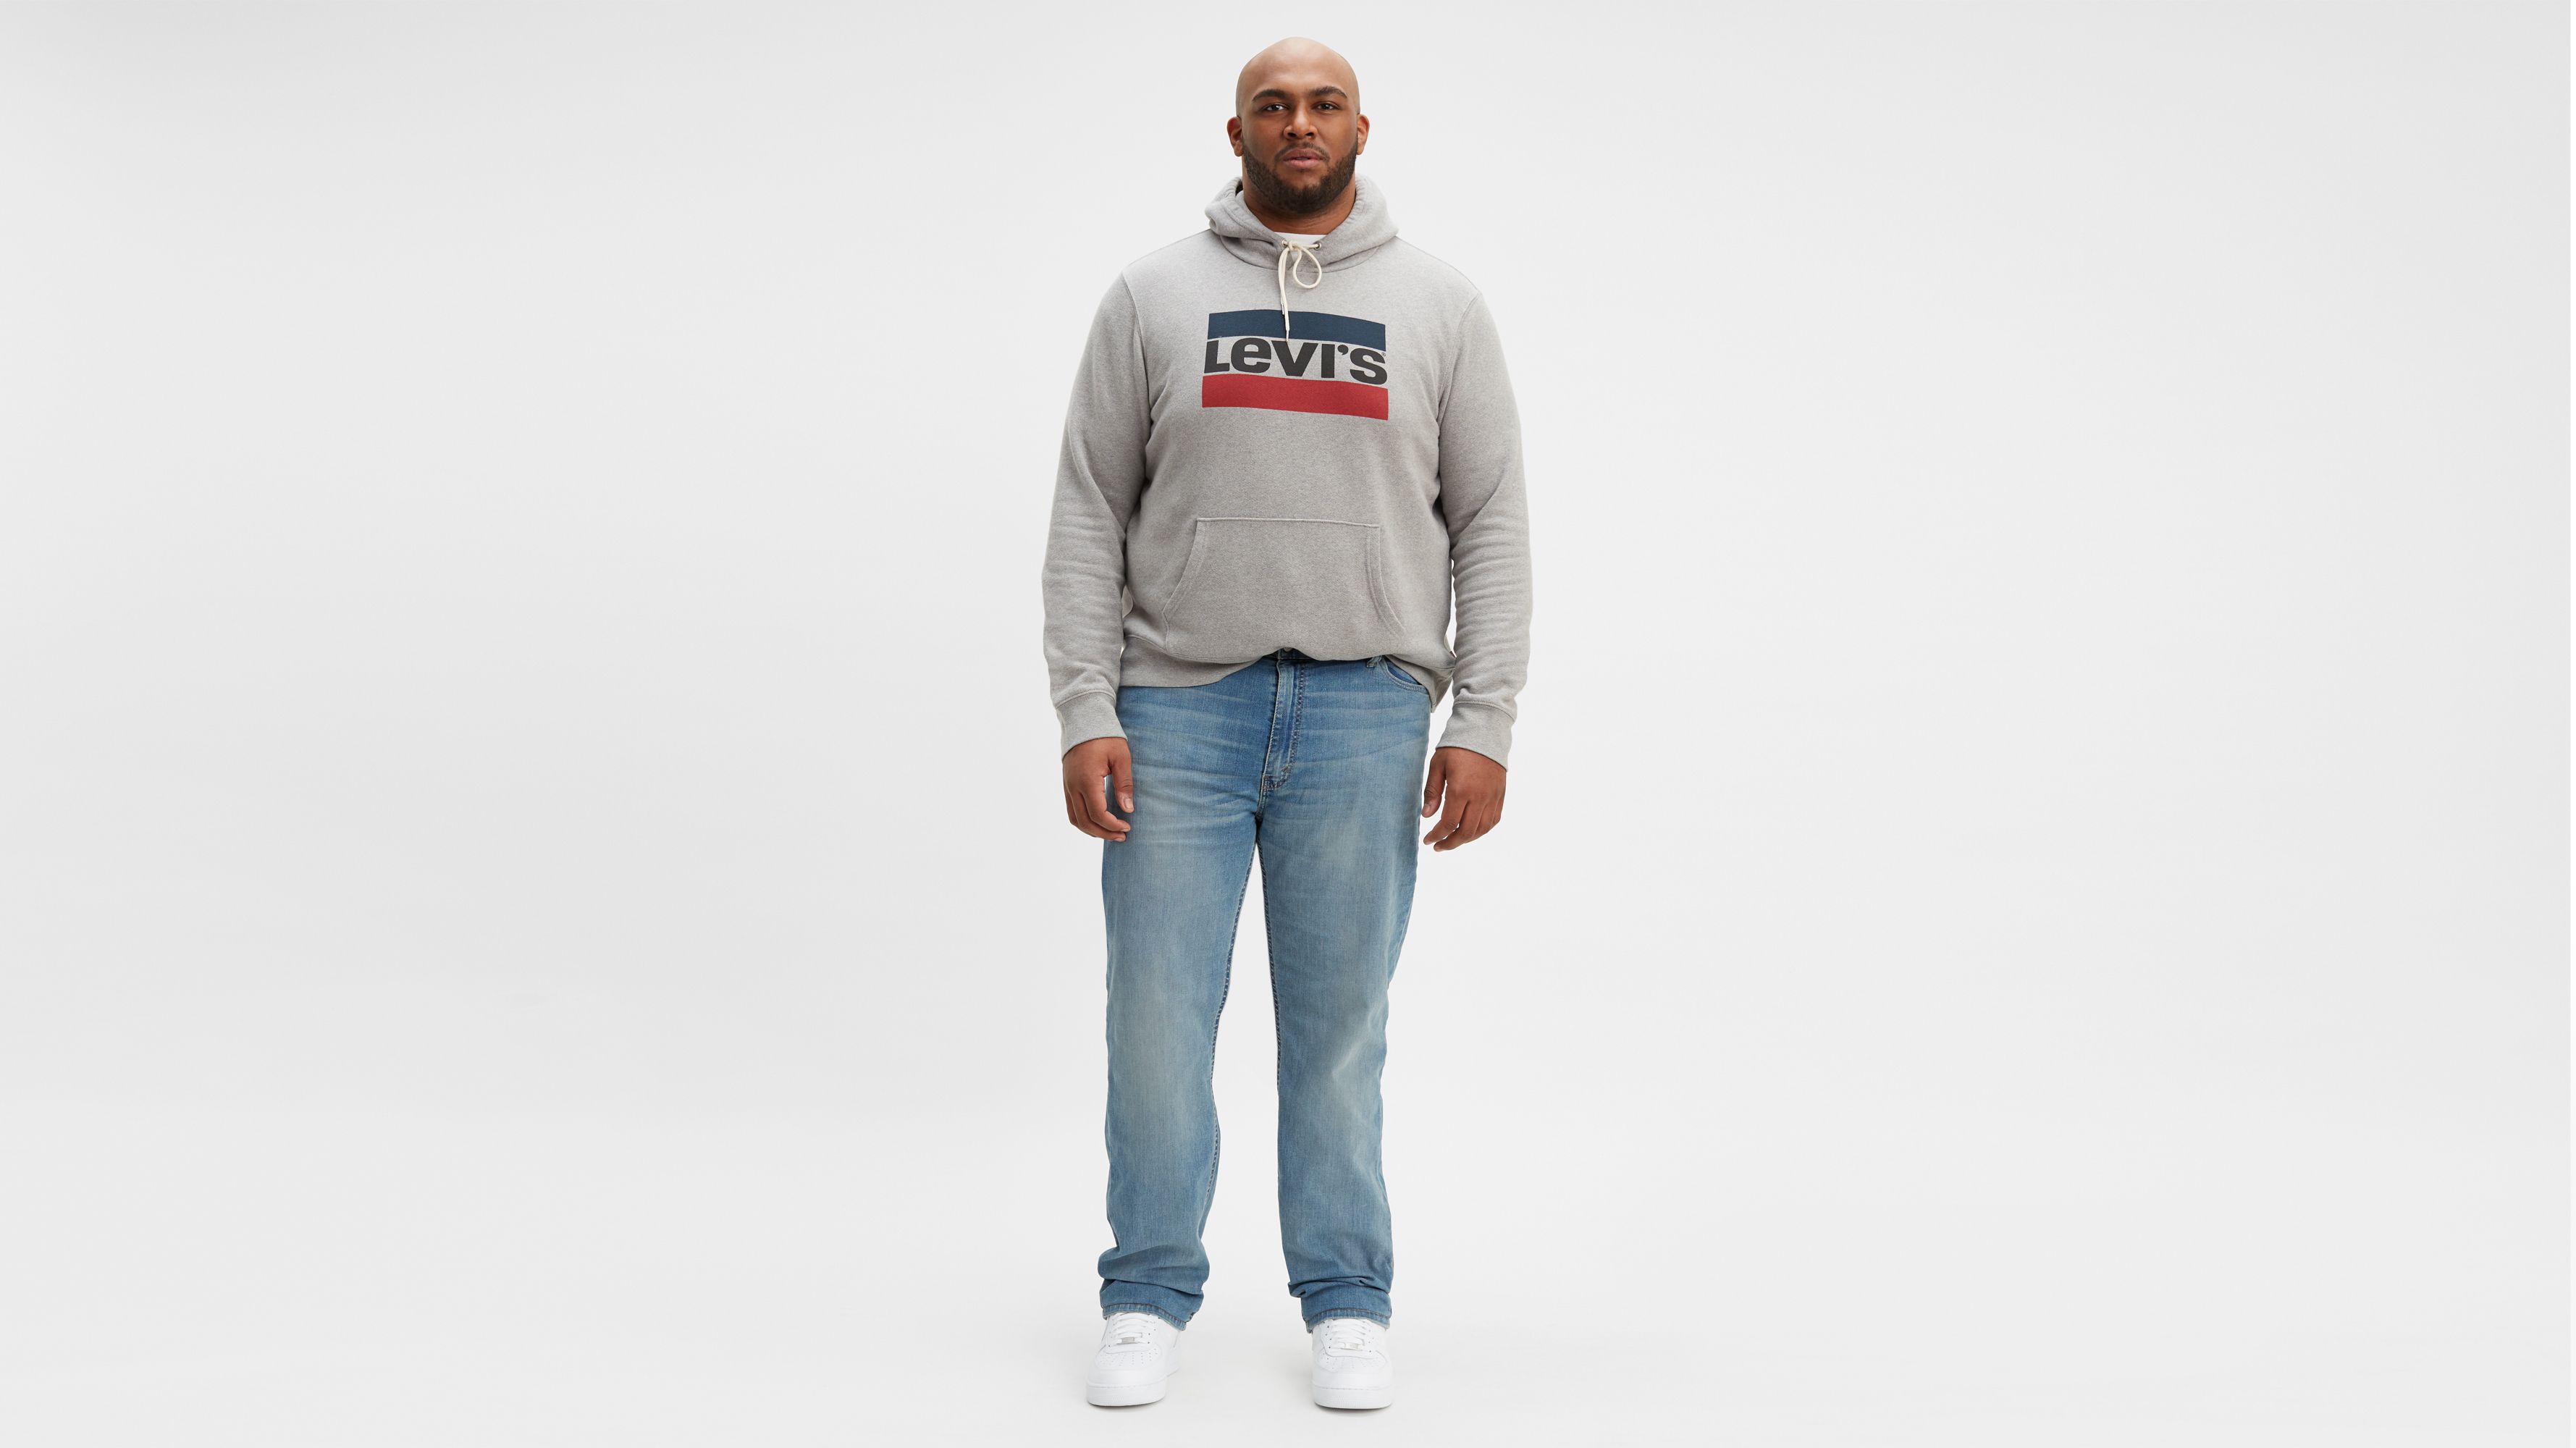 levi's 541 big and tall jeans